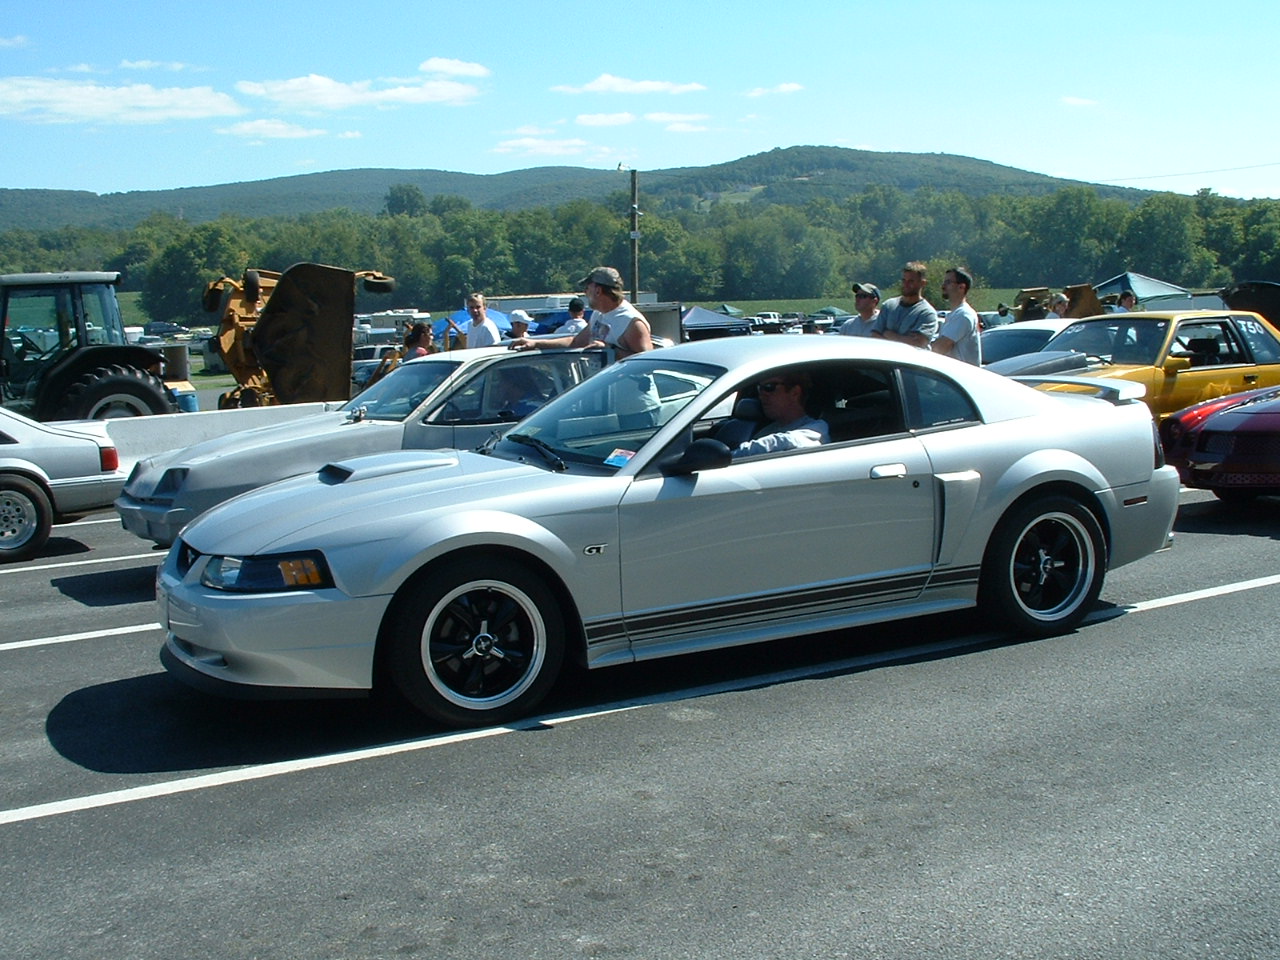 2001 Ford mustang 0-60 times #2